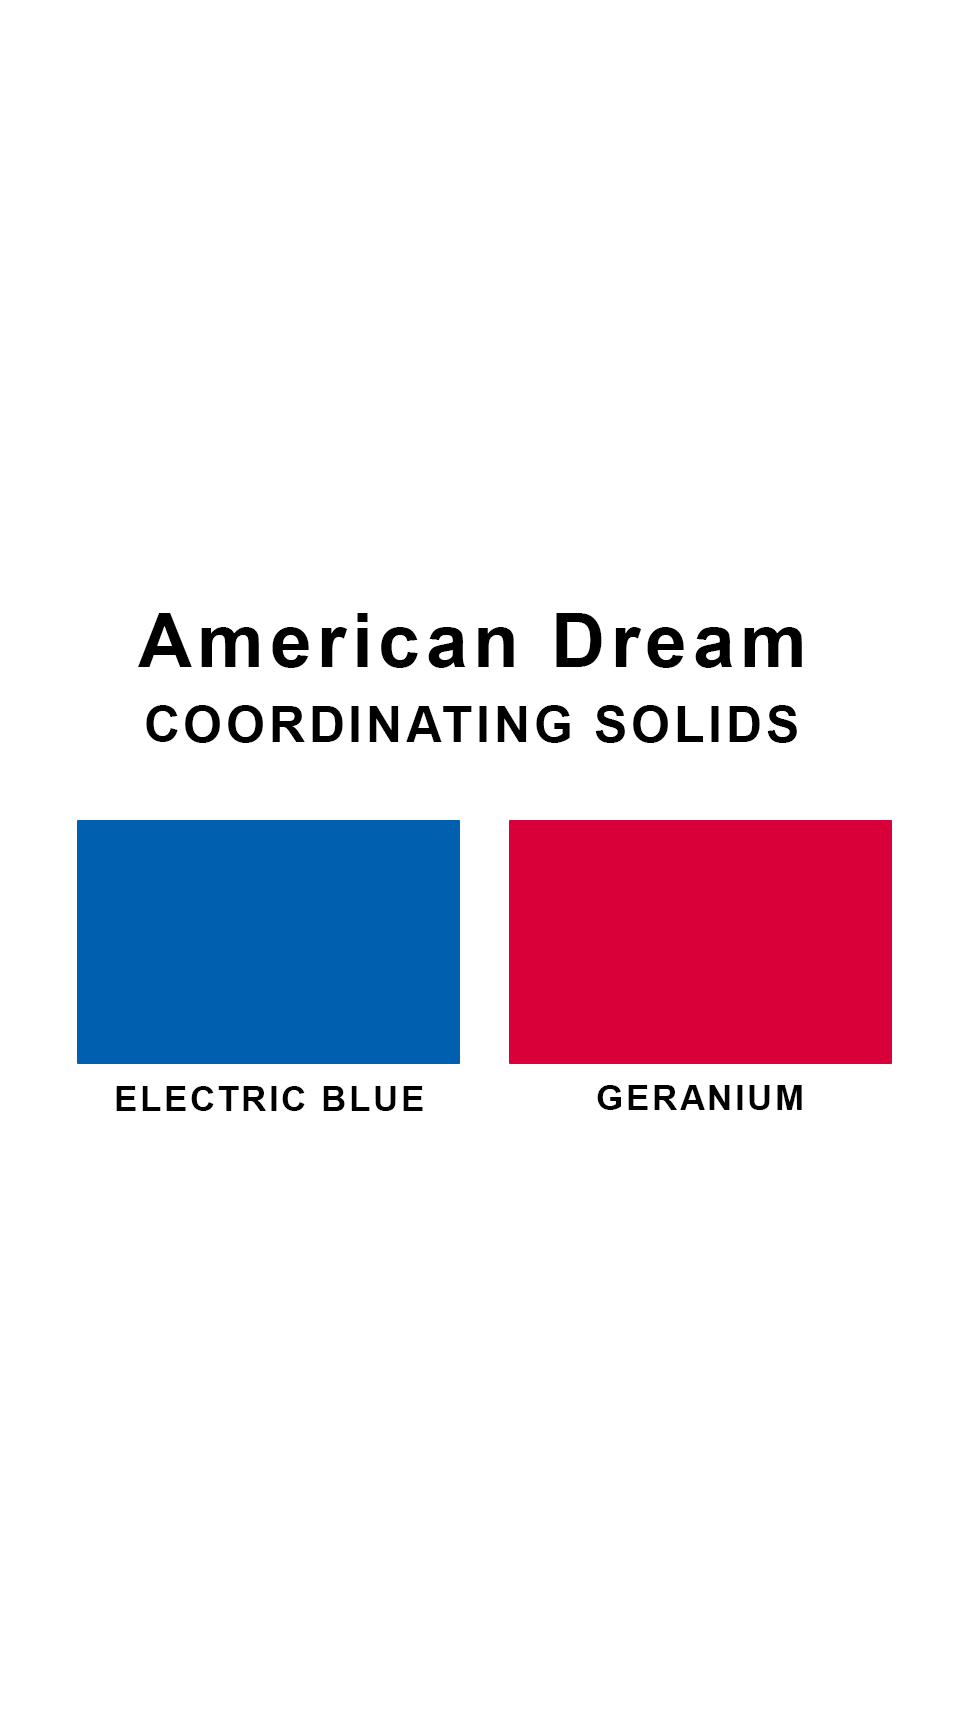 Coordinating solids chart for Sunsets American Dream swimsuit print: Electric Blue and Geranium